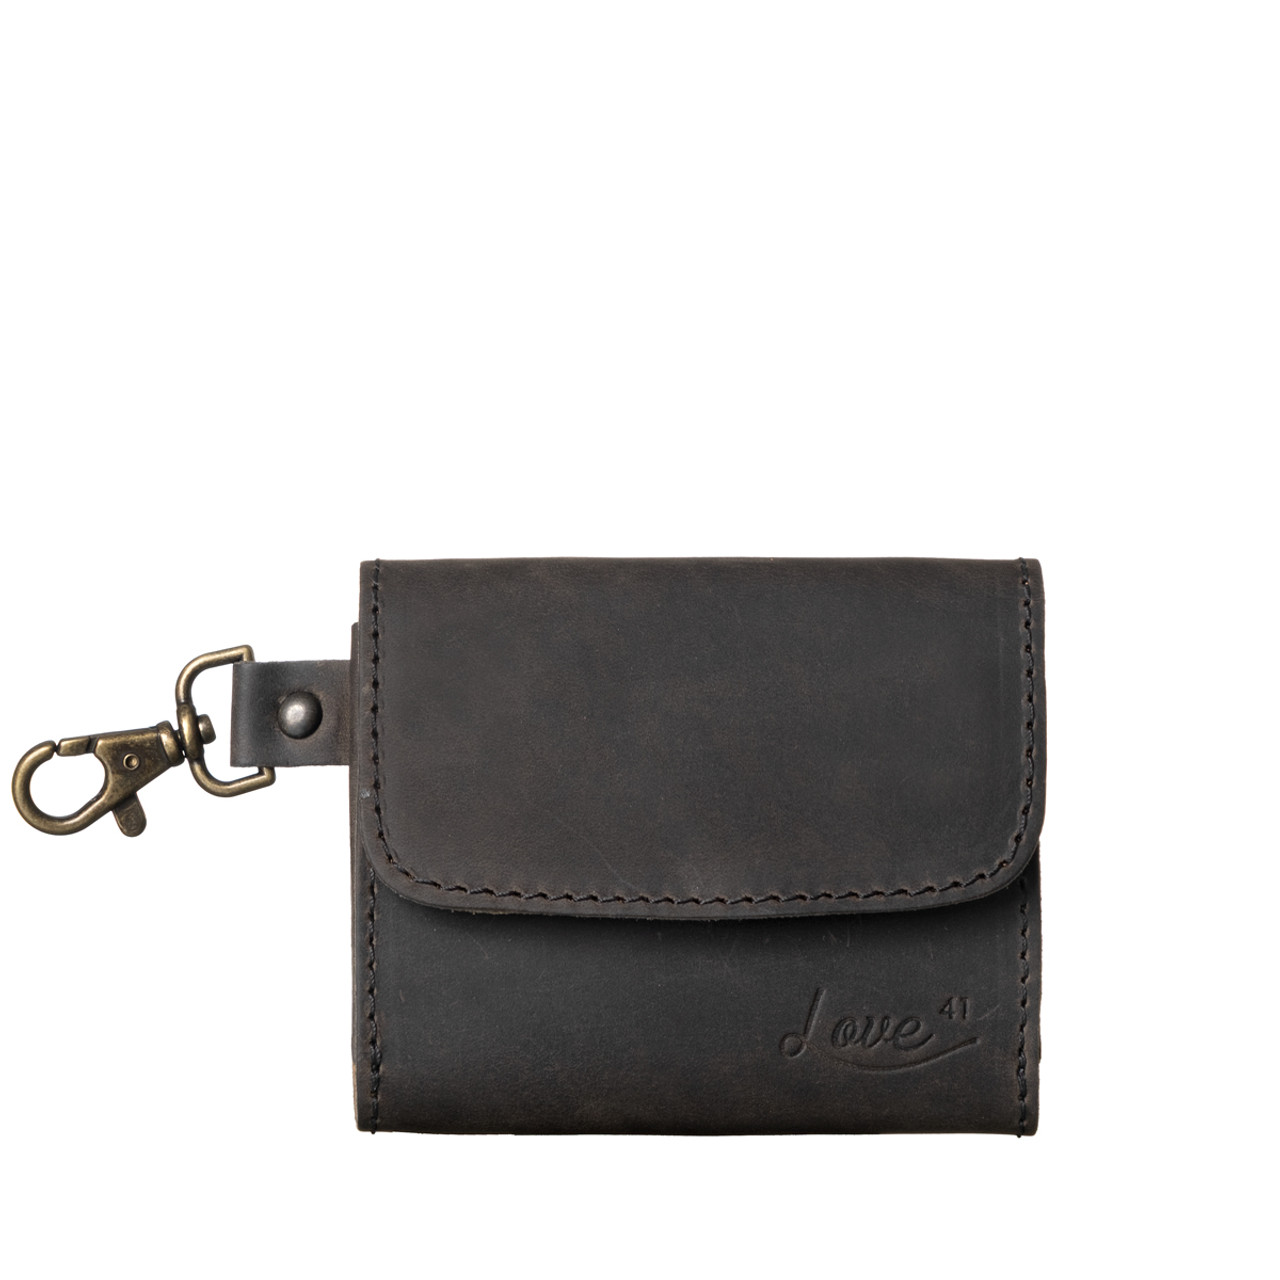 100%Leather Coin Purse.ZipCash.Cards.KeyRing.SOFT LEATHER.SCHOOL.STOCKING  FILLER | eBay